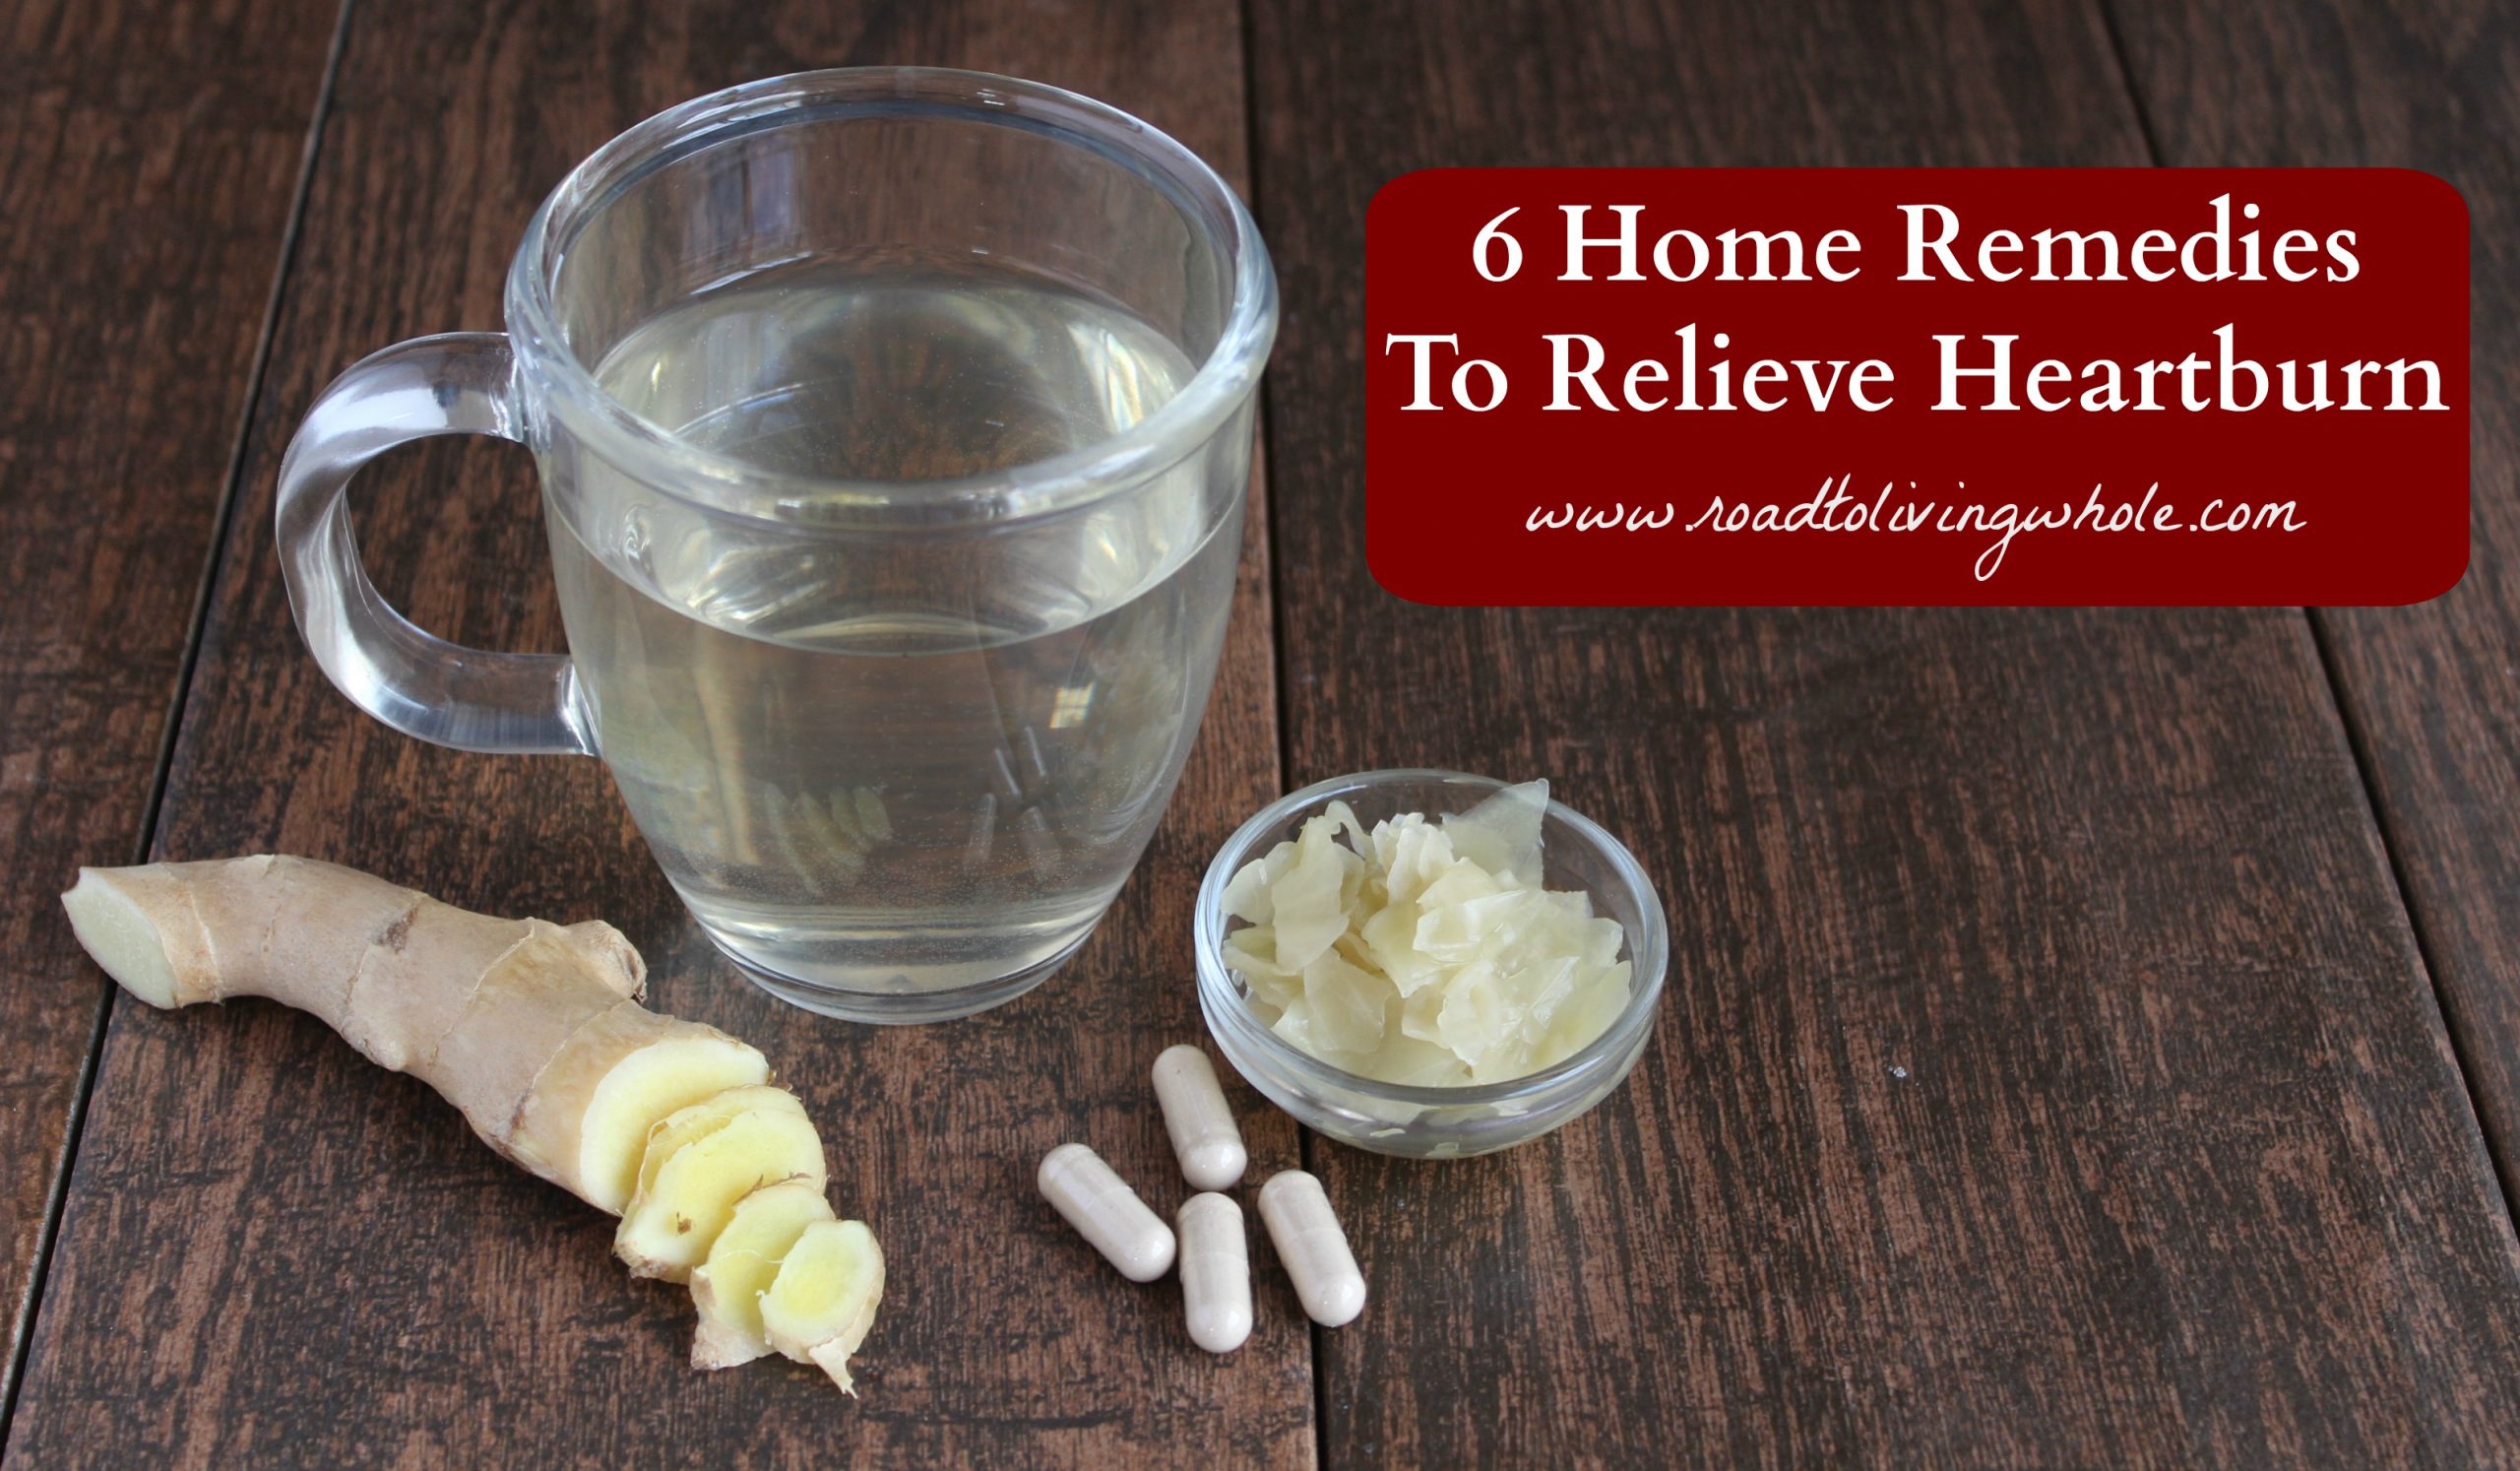 6 Home Remedies For Heartburn